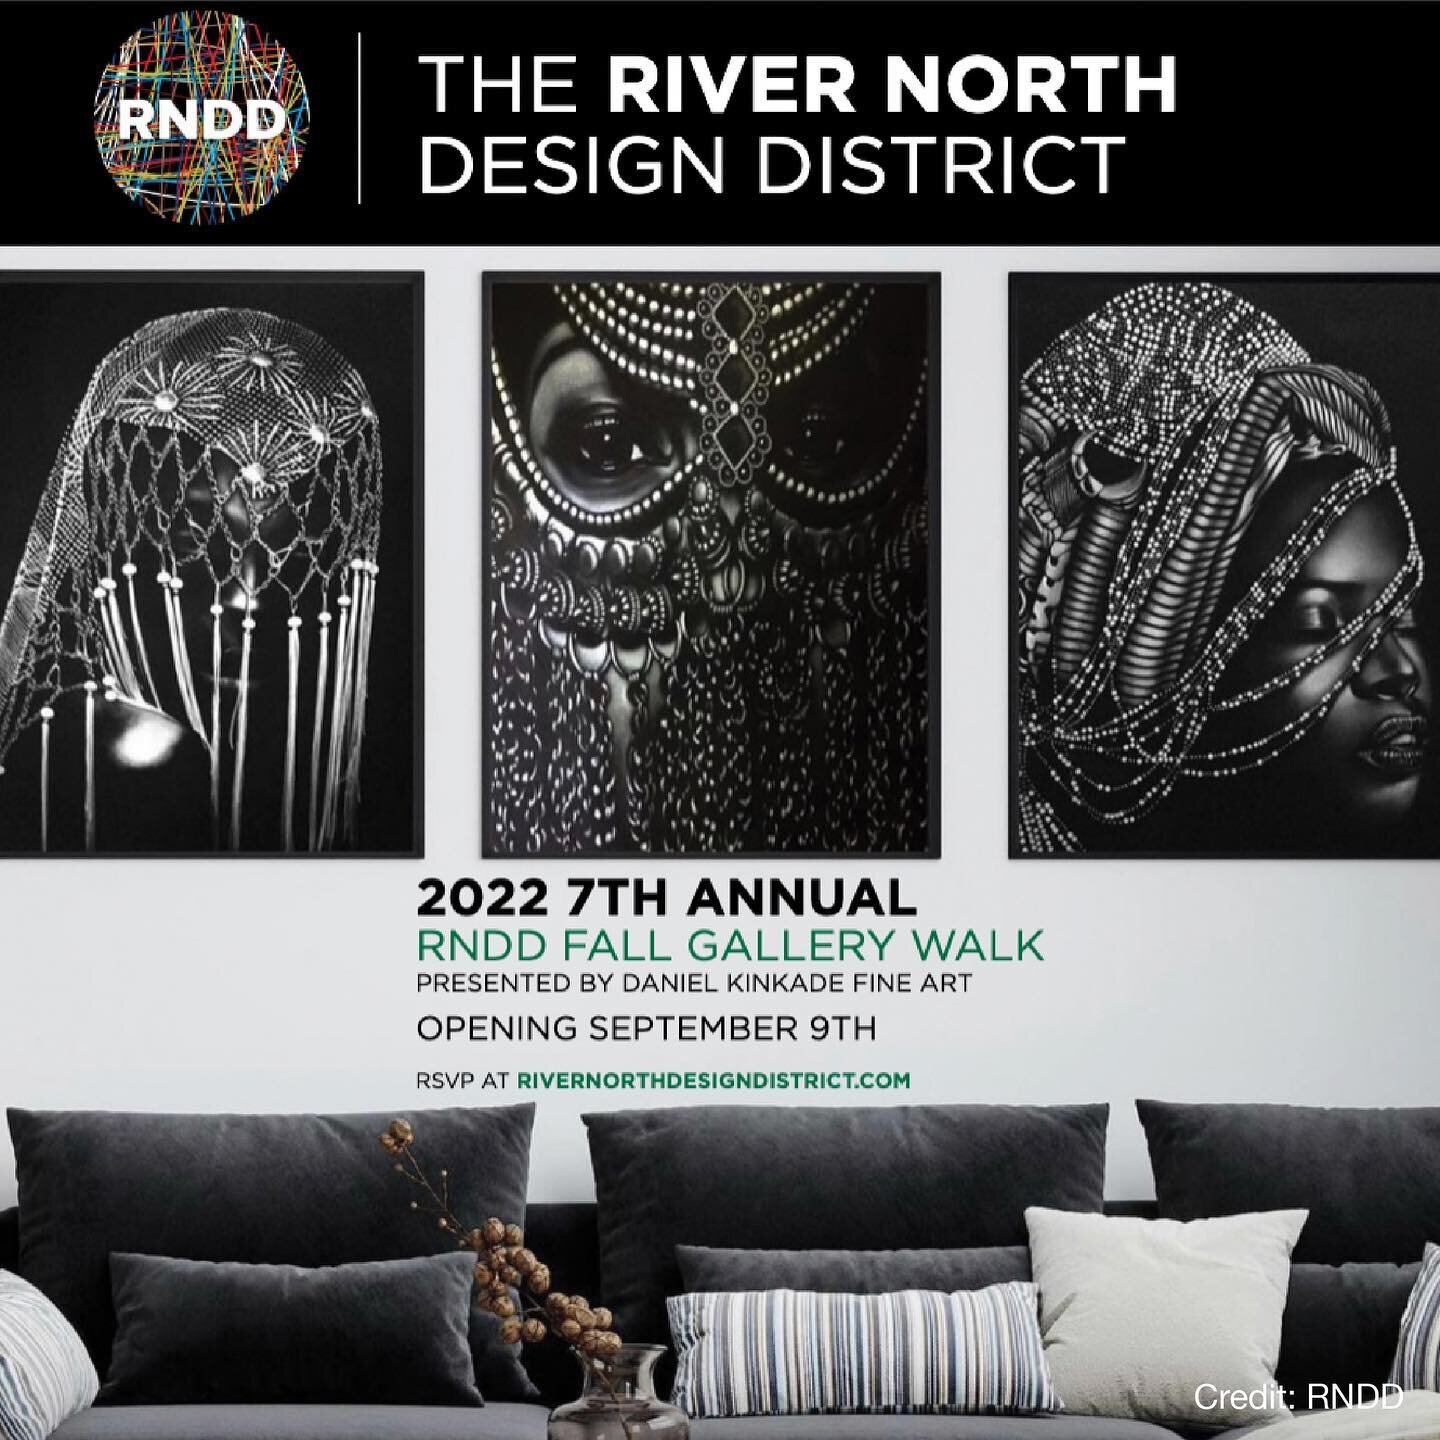 The River North Design District is having this year&rsquo;s annual River North Fall Gallery Walk tomorrow, September 9th 🗓️🎨🖼️

The walk includes approximately 22 locations with special events throughout River North, featuring 31 artists and 20 de